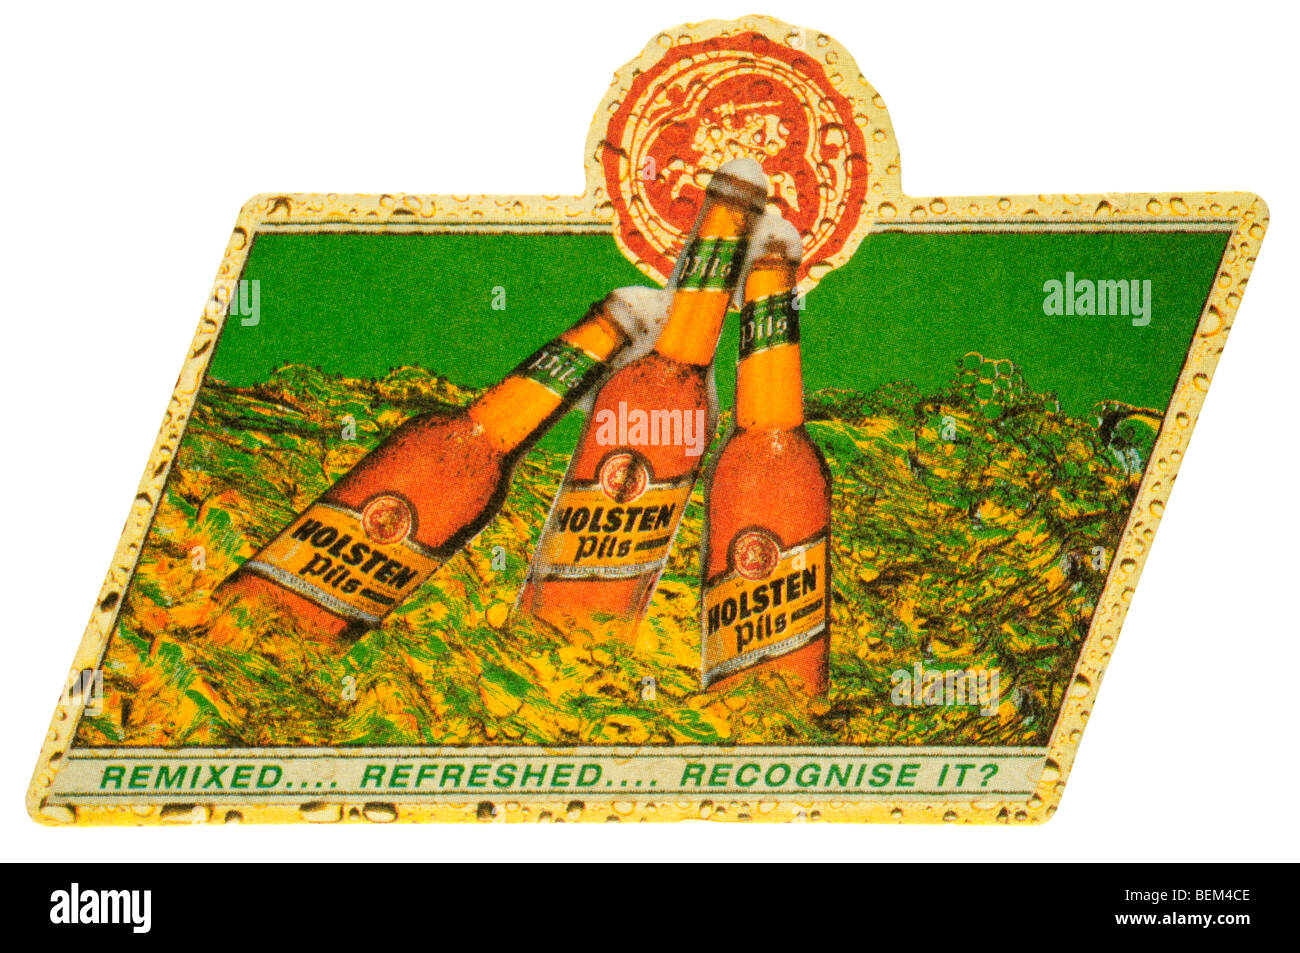 holsten pils remixed refreshed recognise it Stock Photo